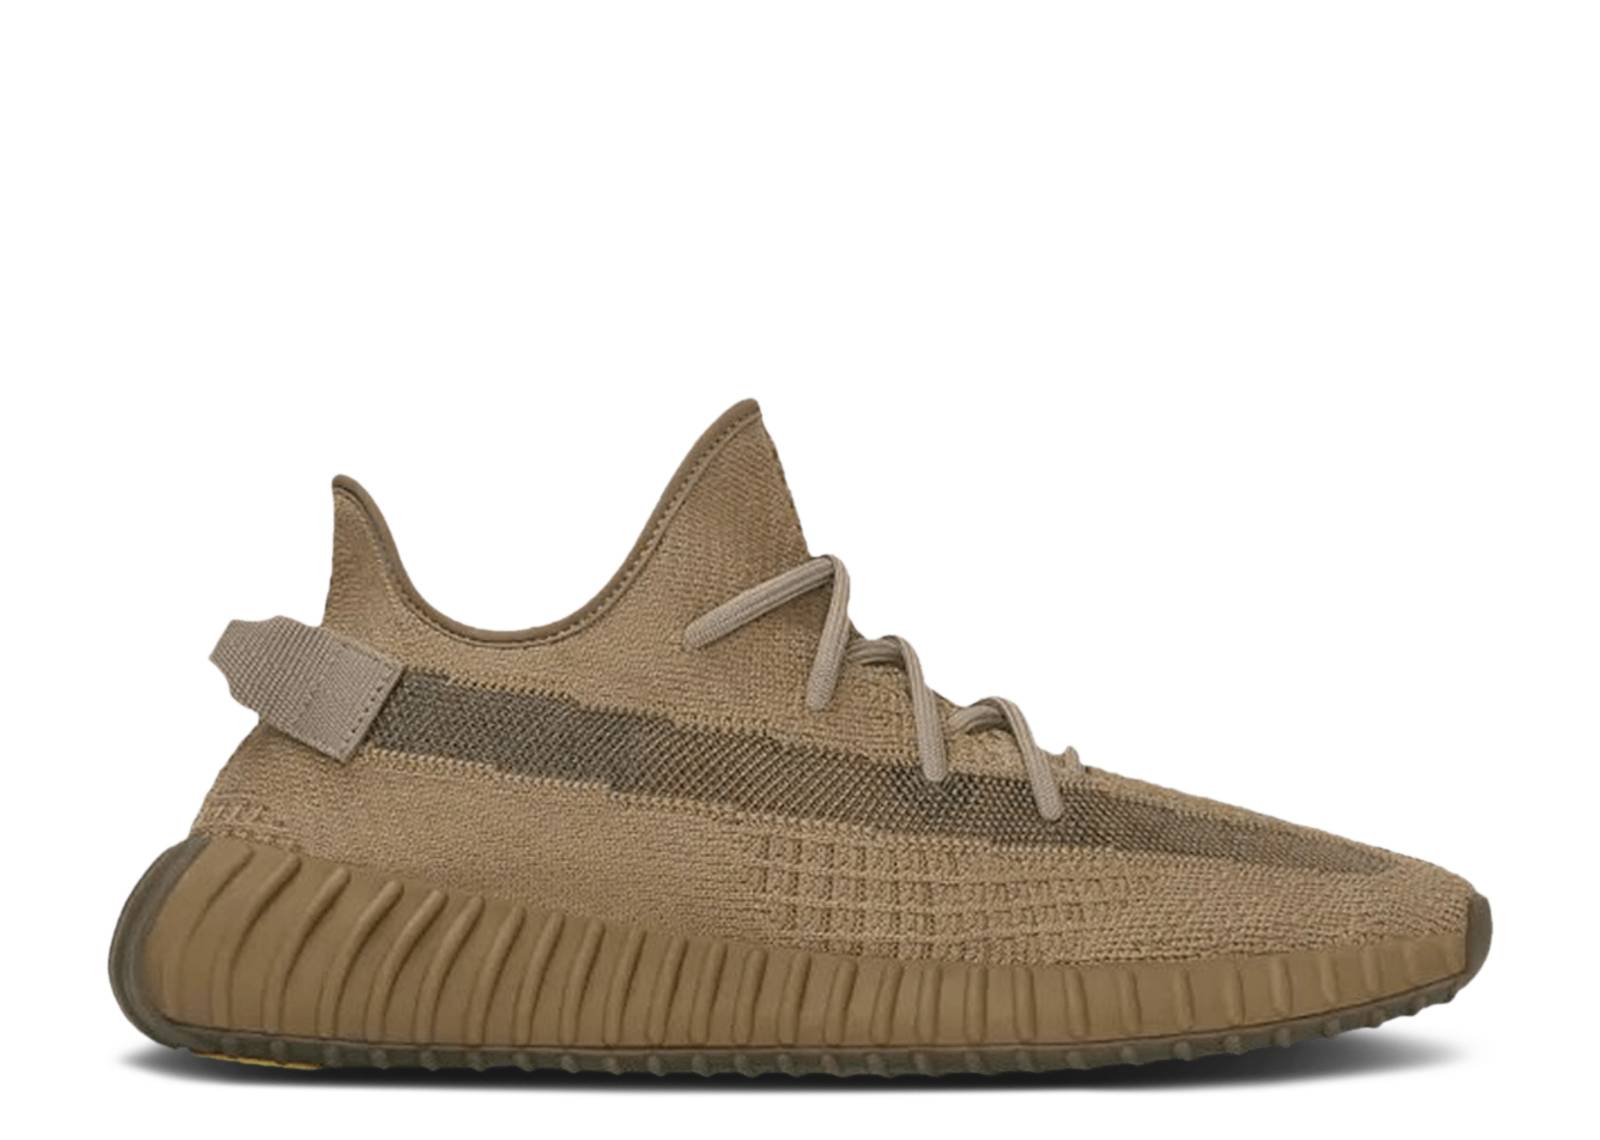 Yeezy Boost 350 V2 Kids 'Earth'Color:Brown,Size:8